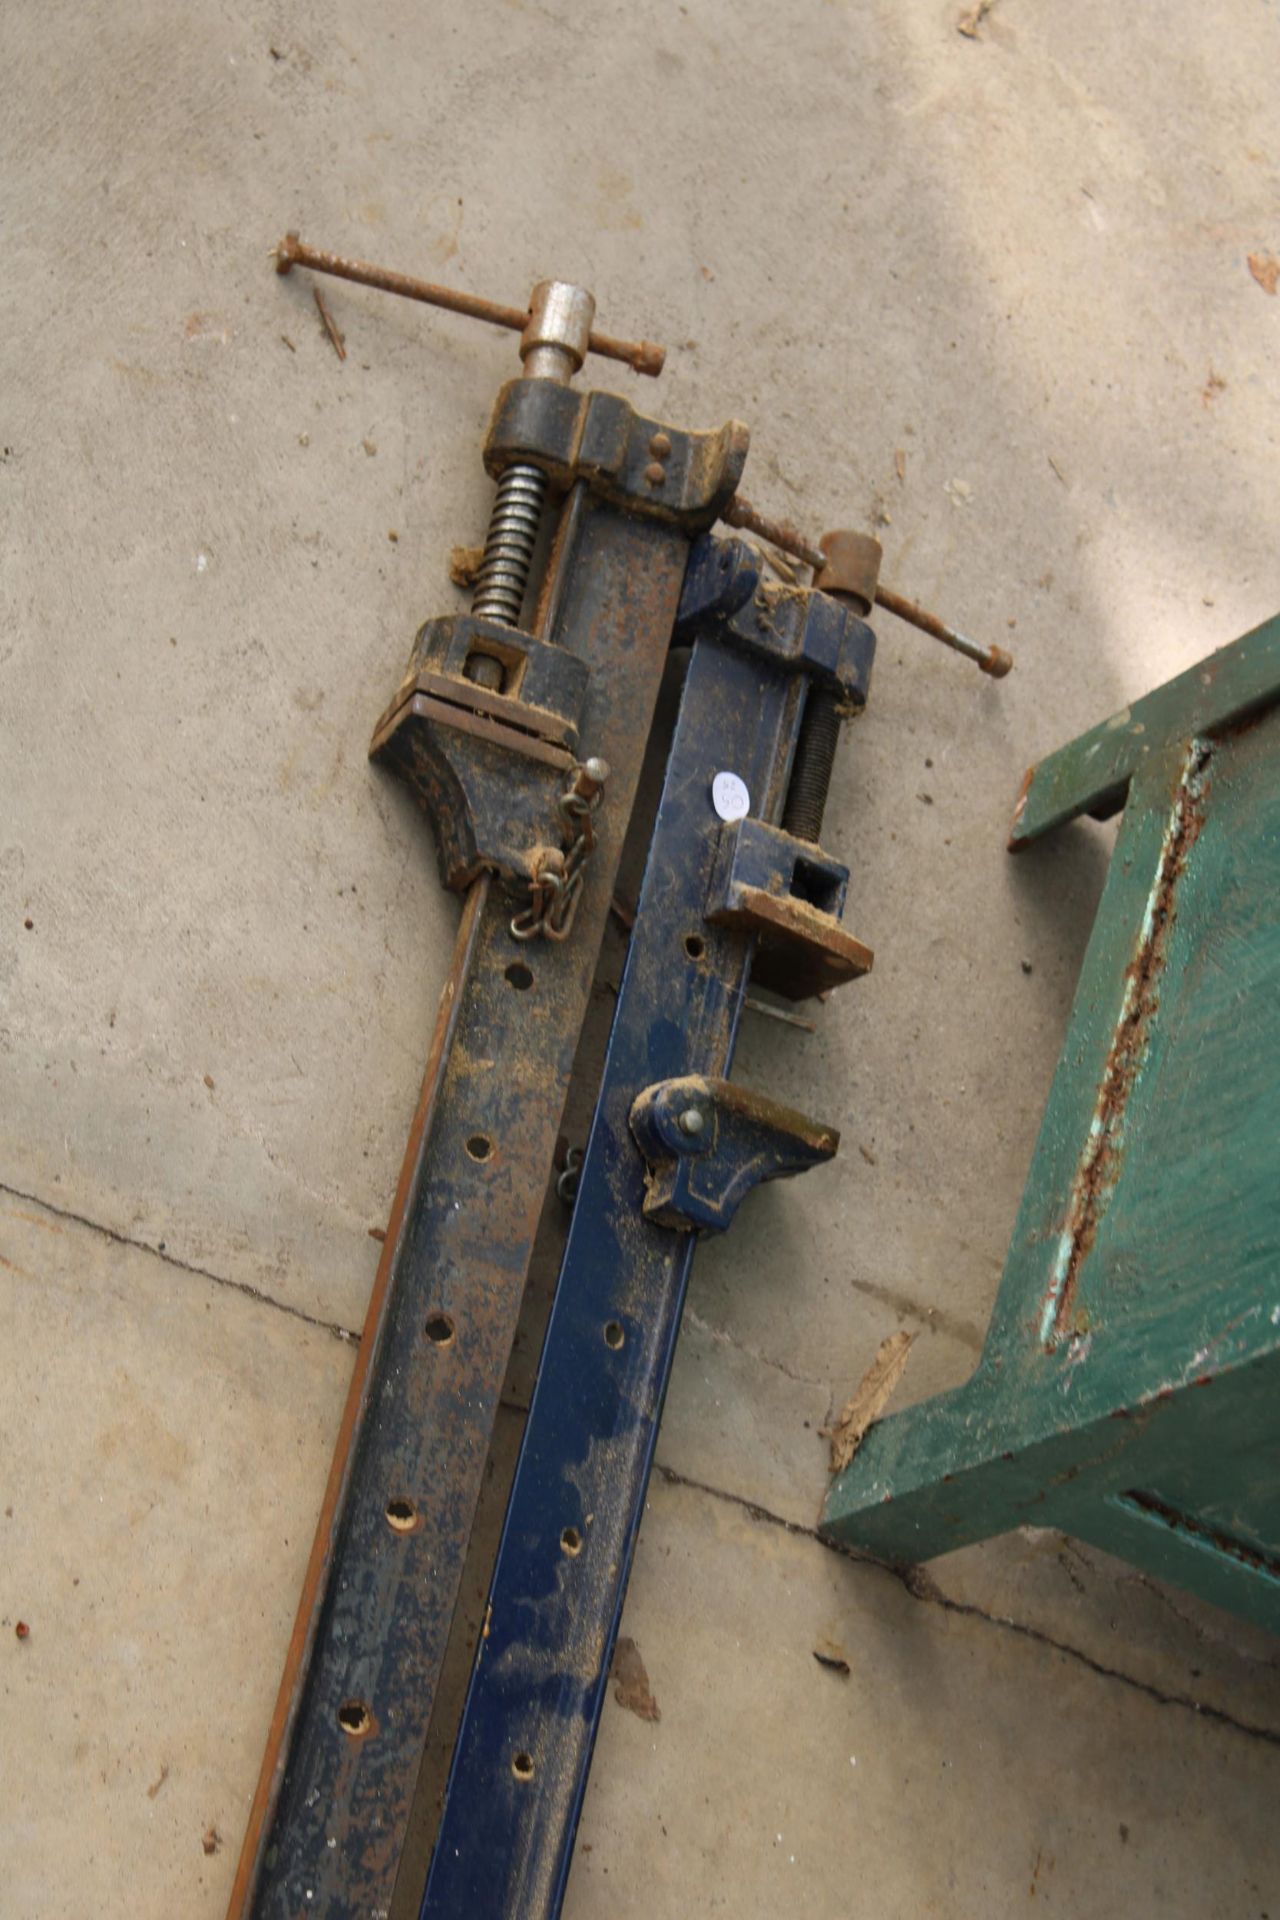 A PAIR OF HEAVY DUTY 5 FOOT METAL SASH CLAMPS - Image 2 of 2